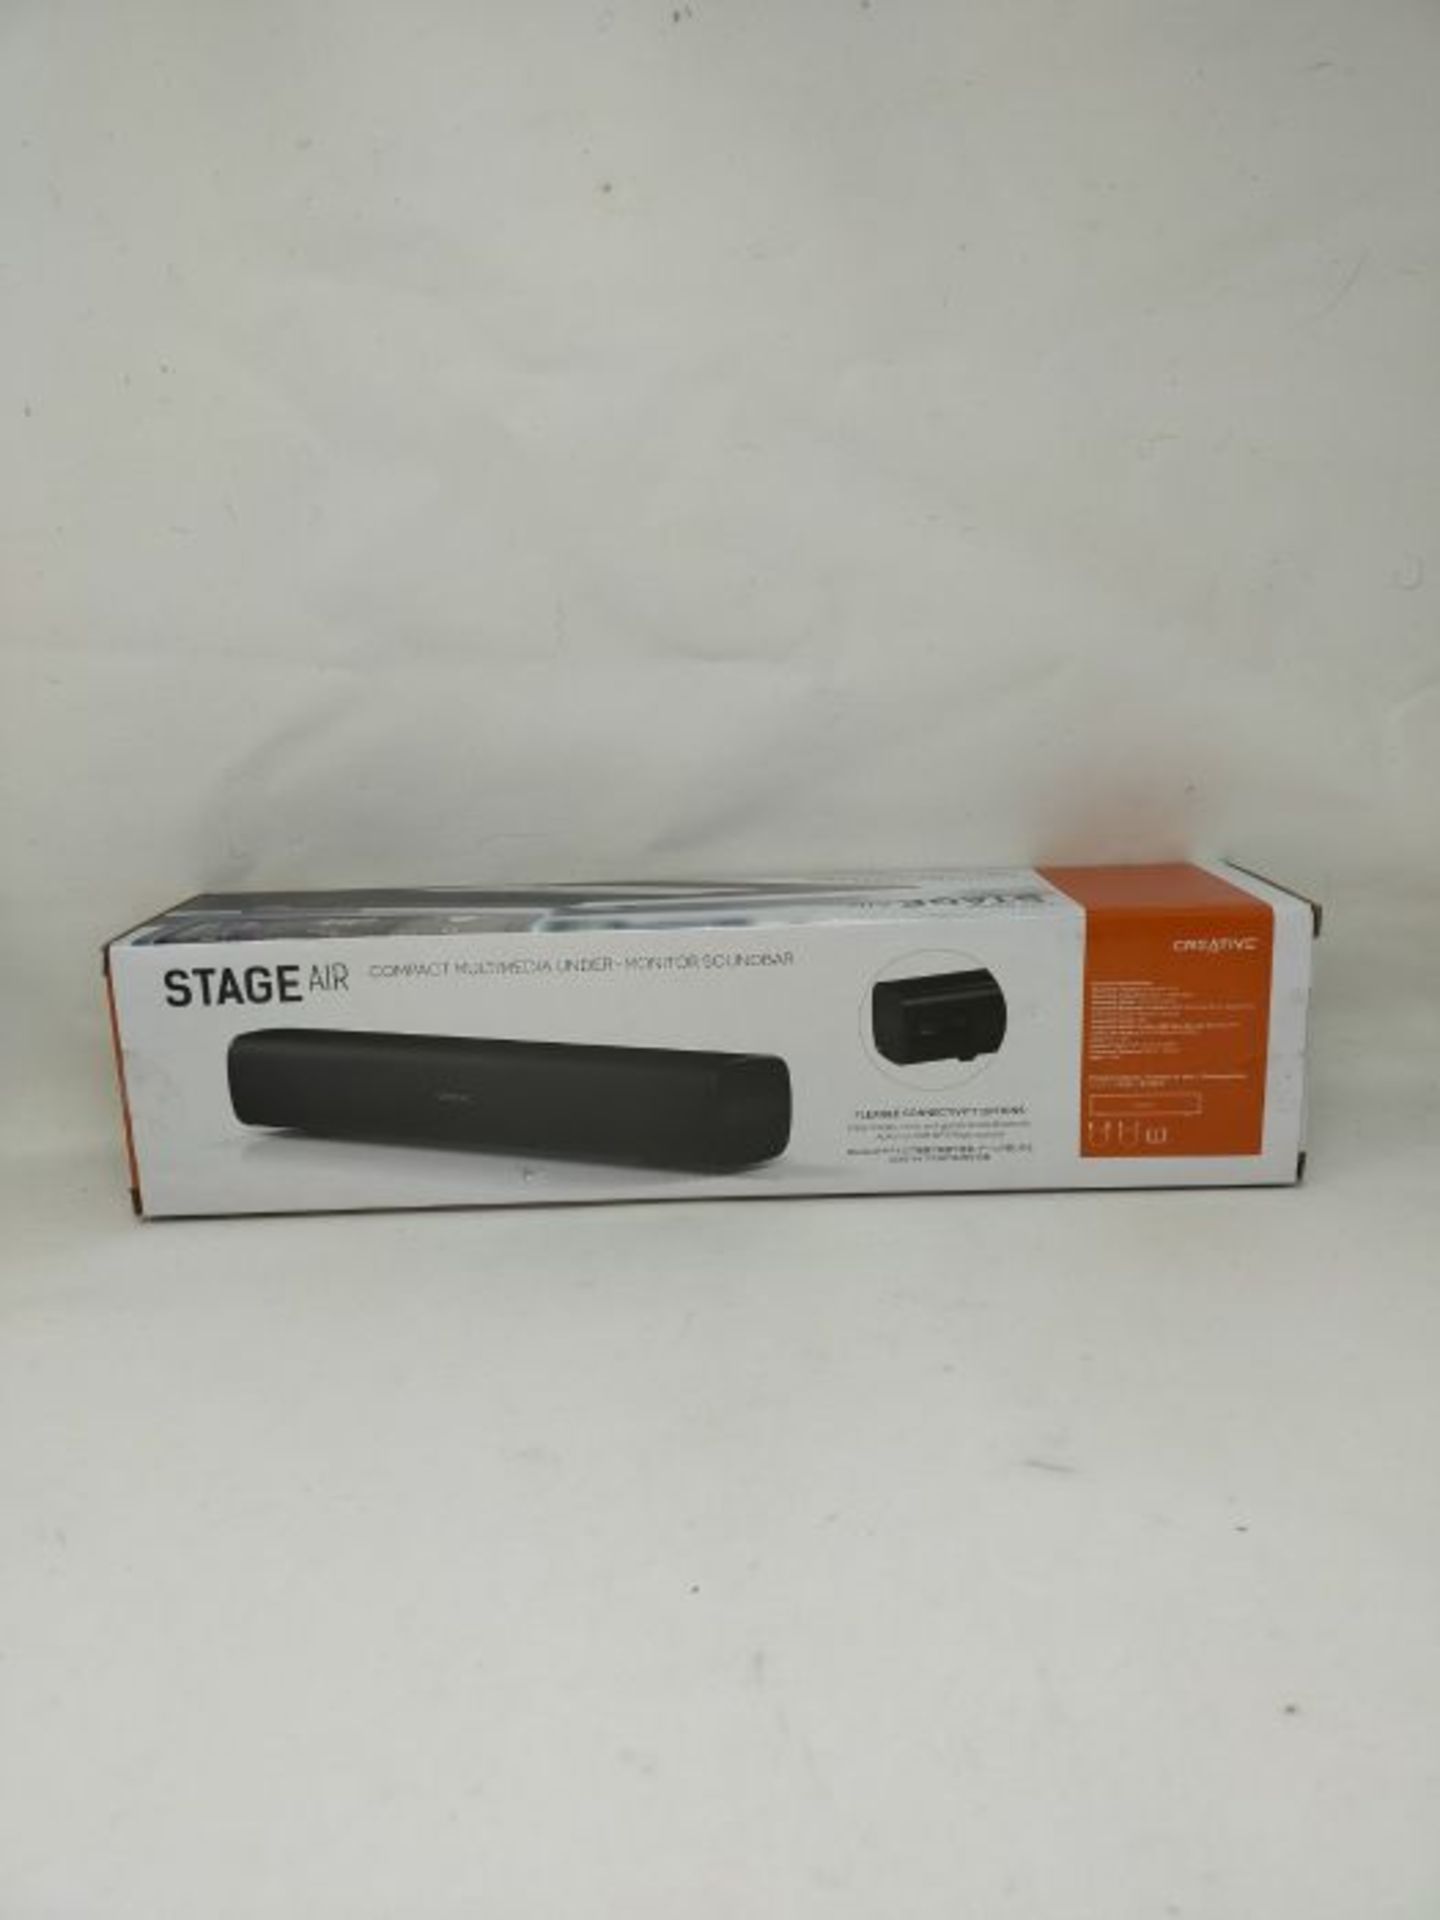 Creative Stage Air Portable and Compact Under-monitor USB-Powered Soundbar for Compute - Image 2 of 3